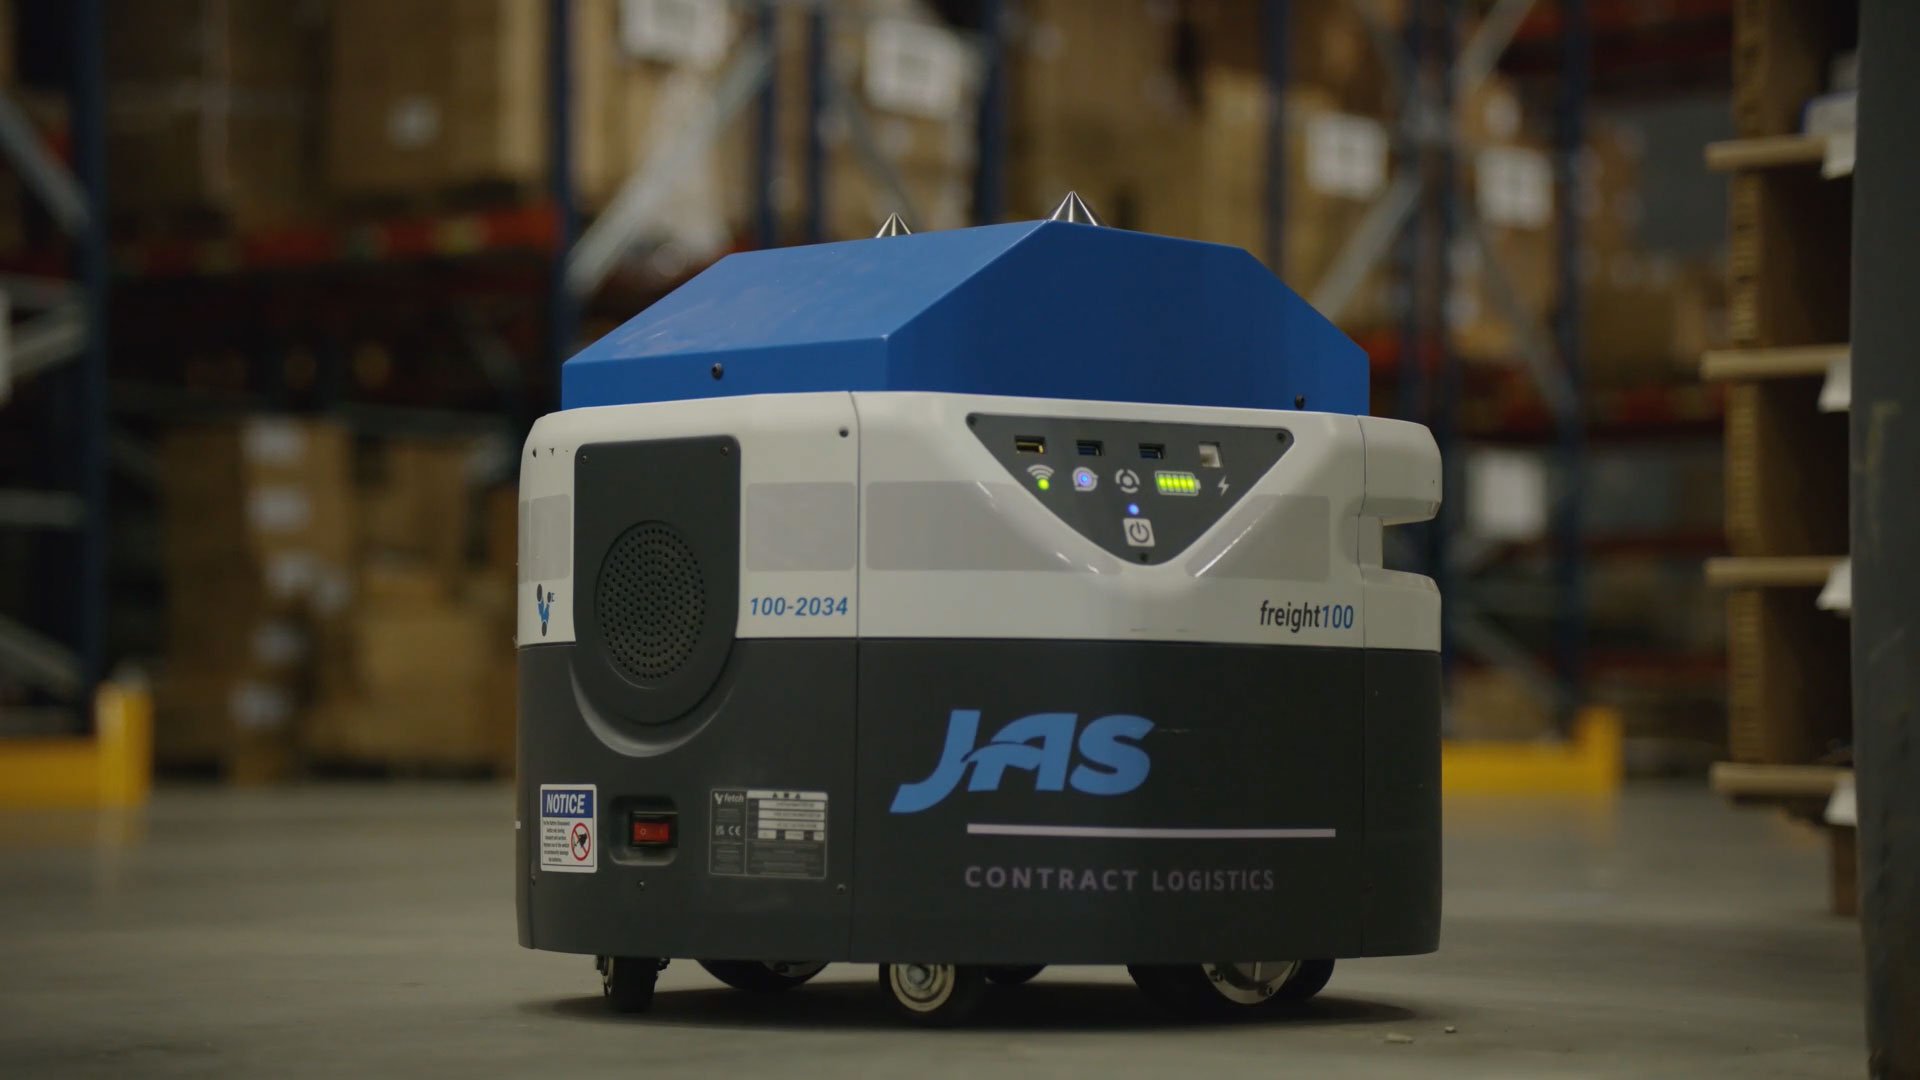 Zebra Technologies' CartConnect100 autonomous mobile robots (AMRs) support JAS Worldwide’s strategy to increase throughput for its fulfillment customers at its new 300,000 square-foot Contract Logistics Super Hub in Olive Branch, Mississippi.